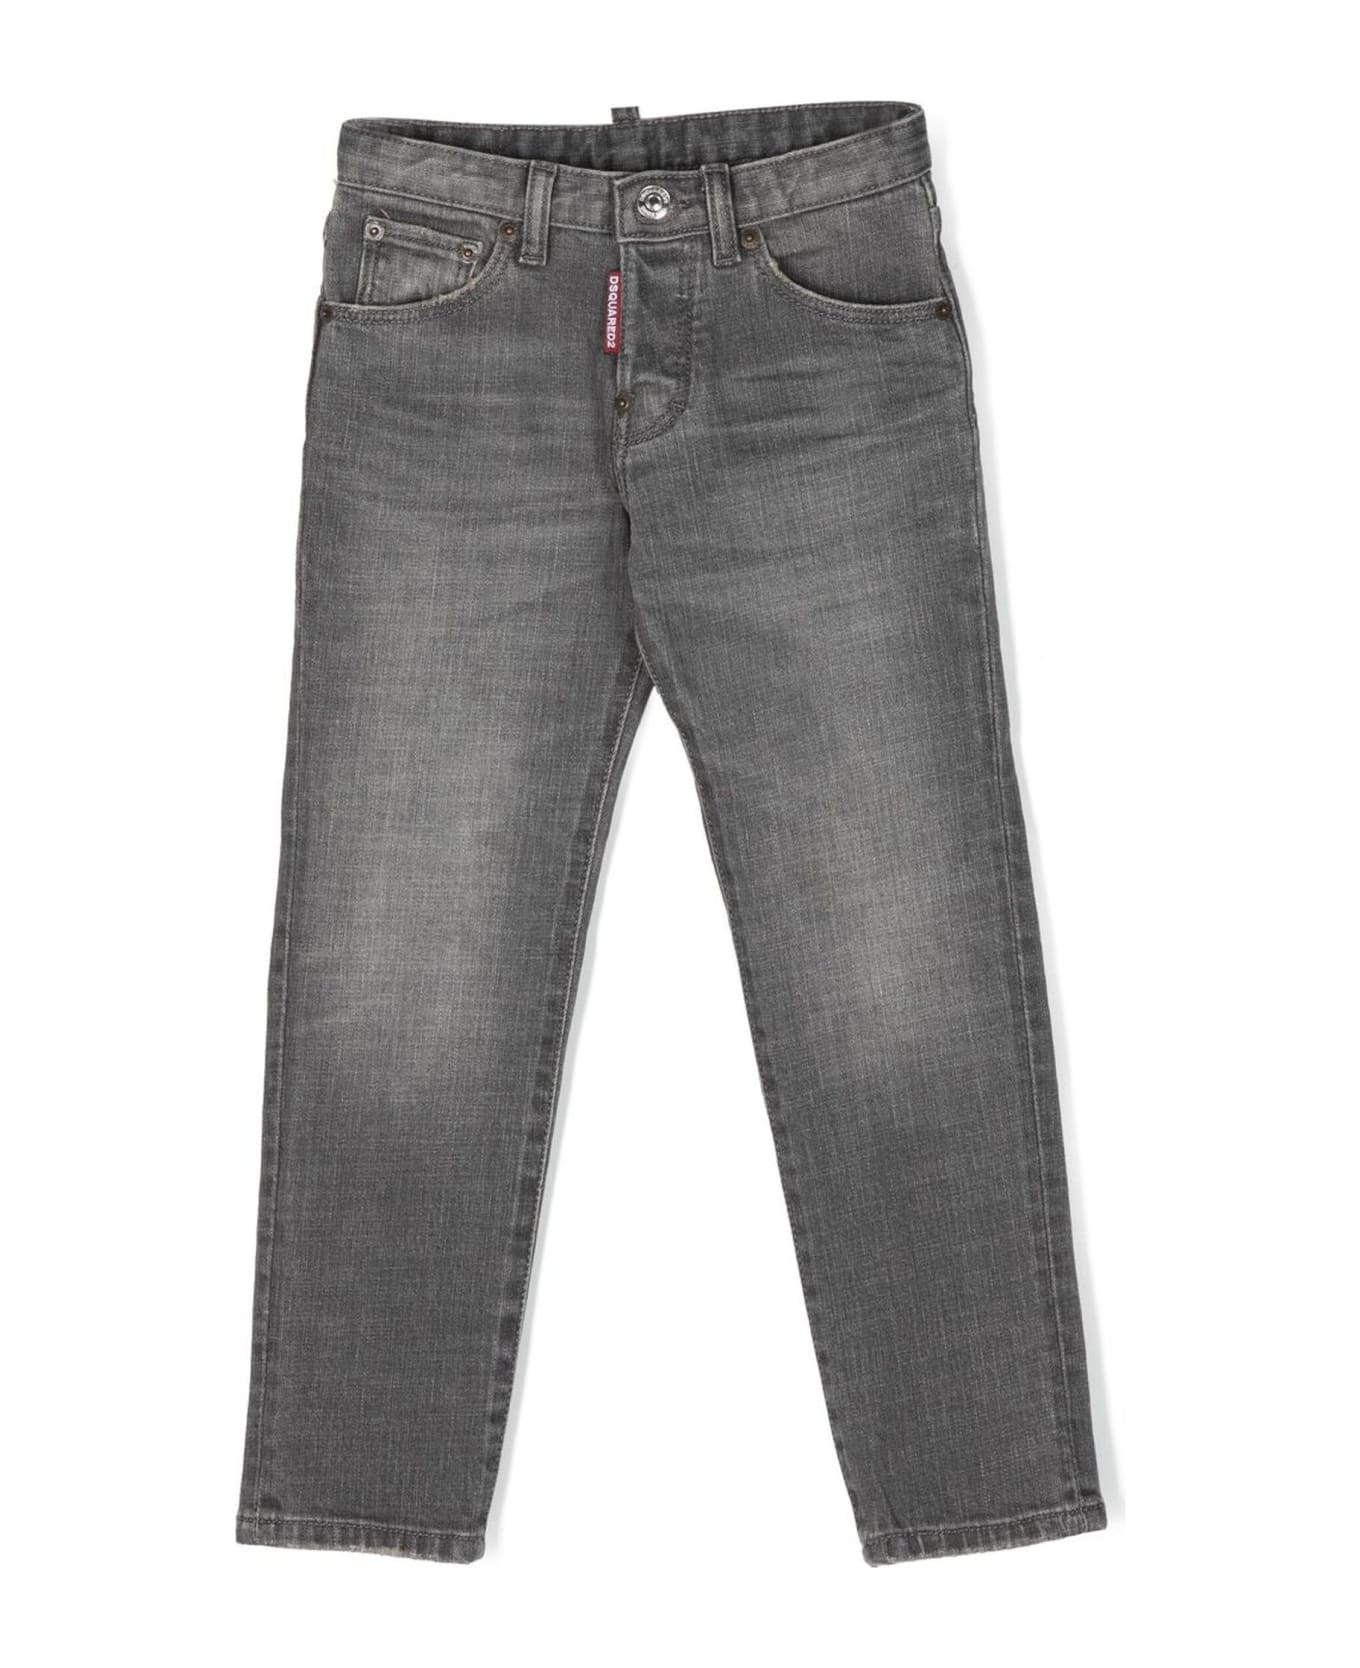 Dsquared2 Jeans Grey - Grey ボトムス